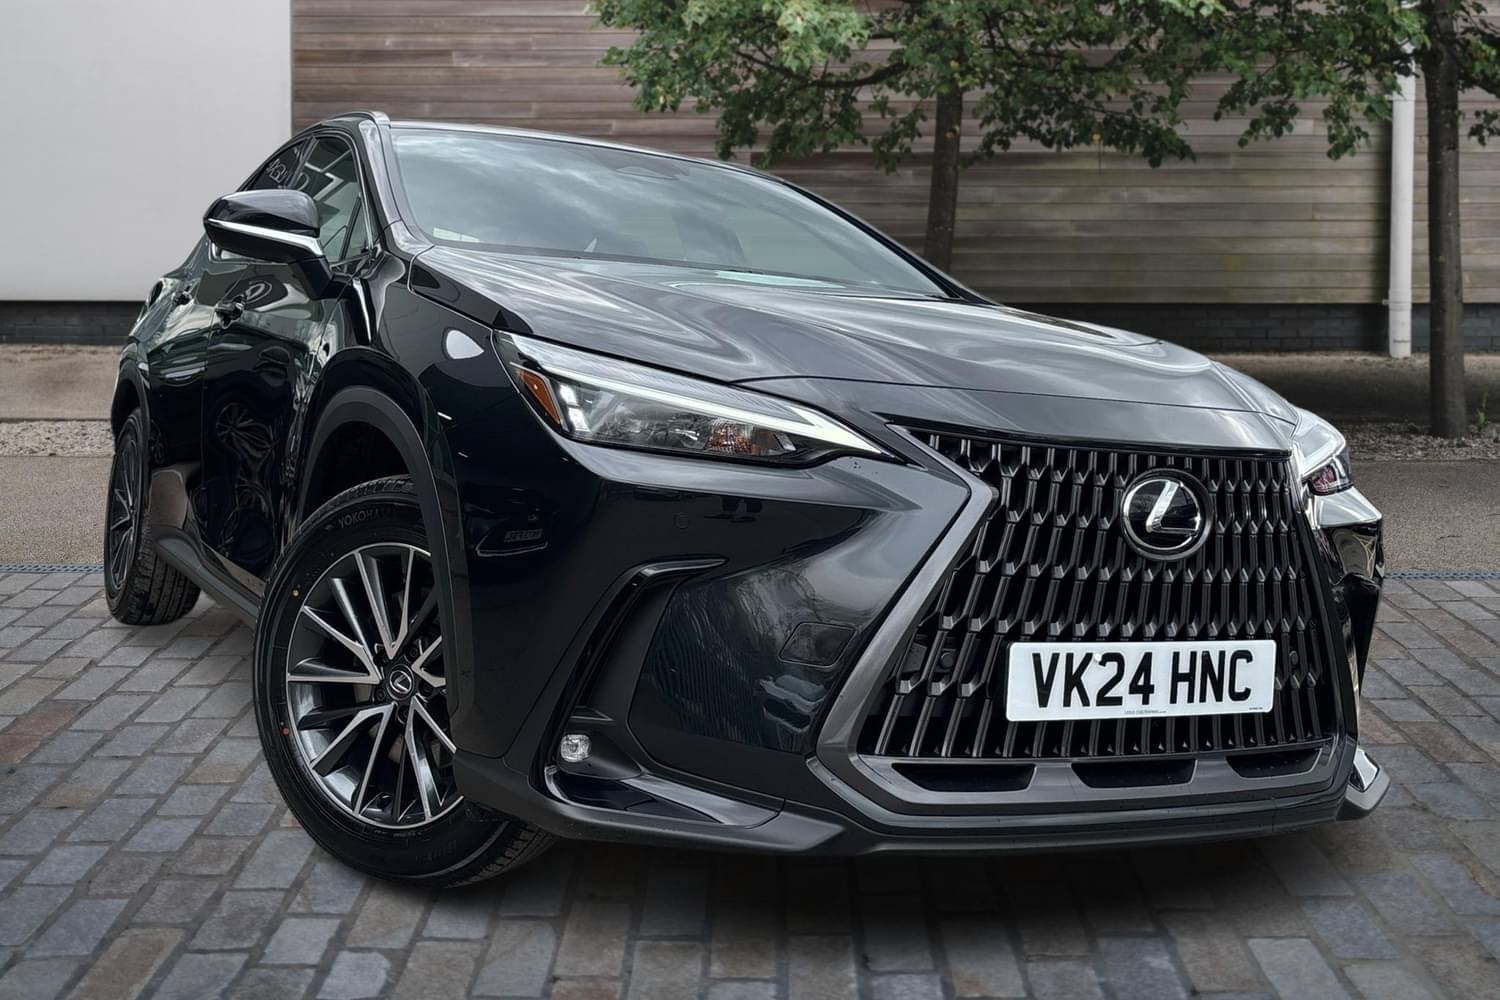 Used cars in stock at Listers Lexus - Page 6